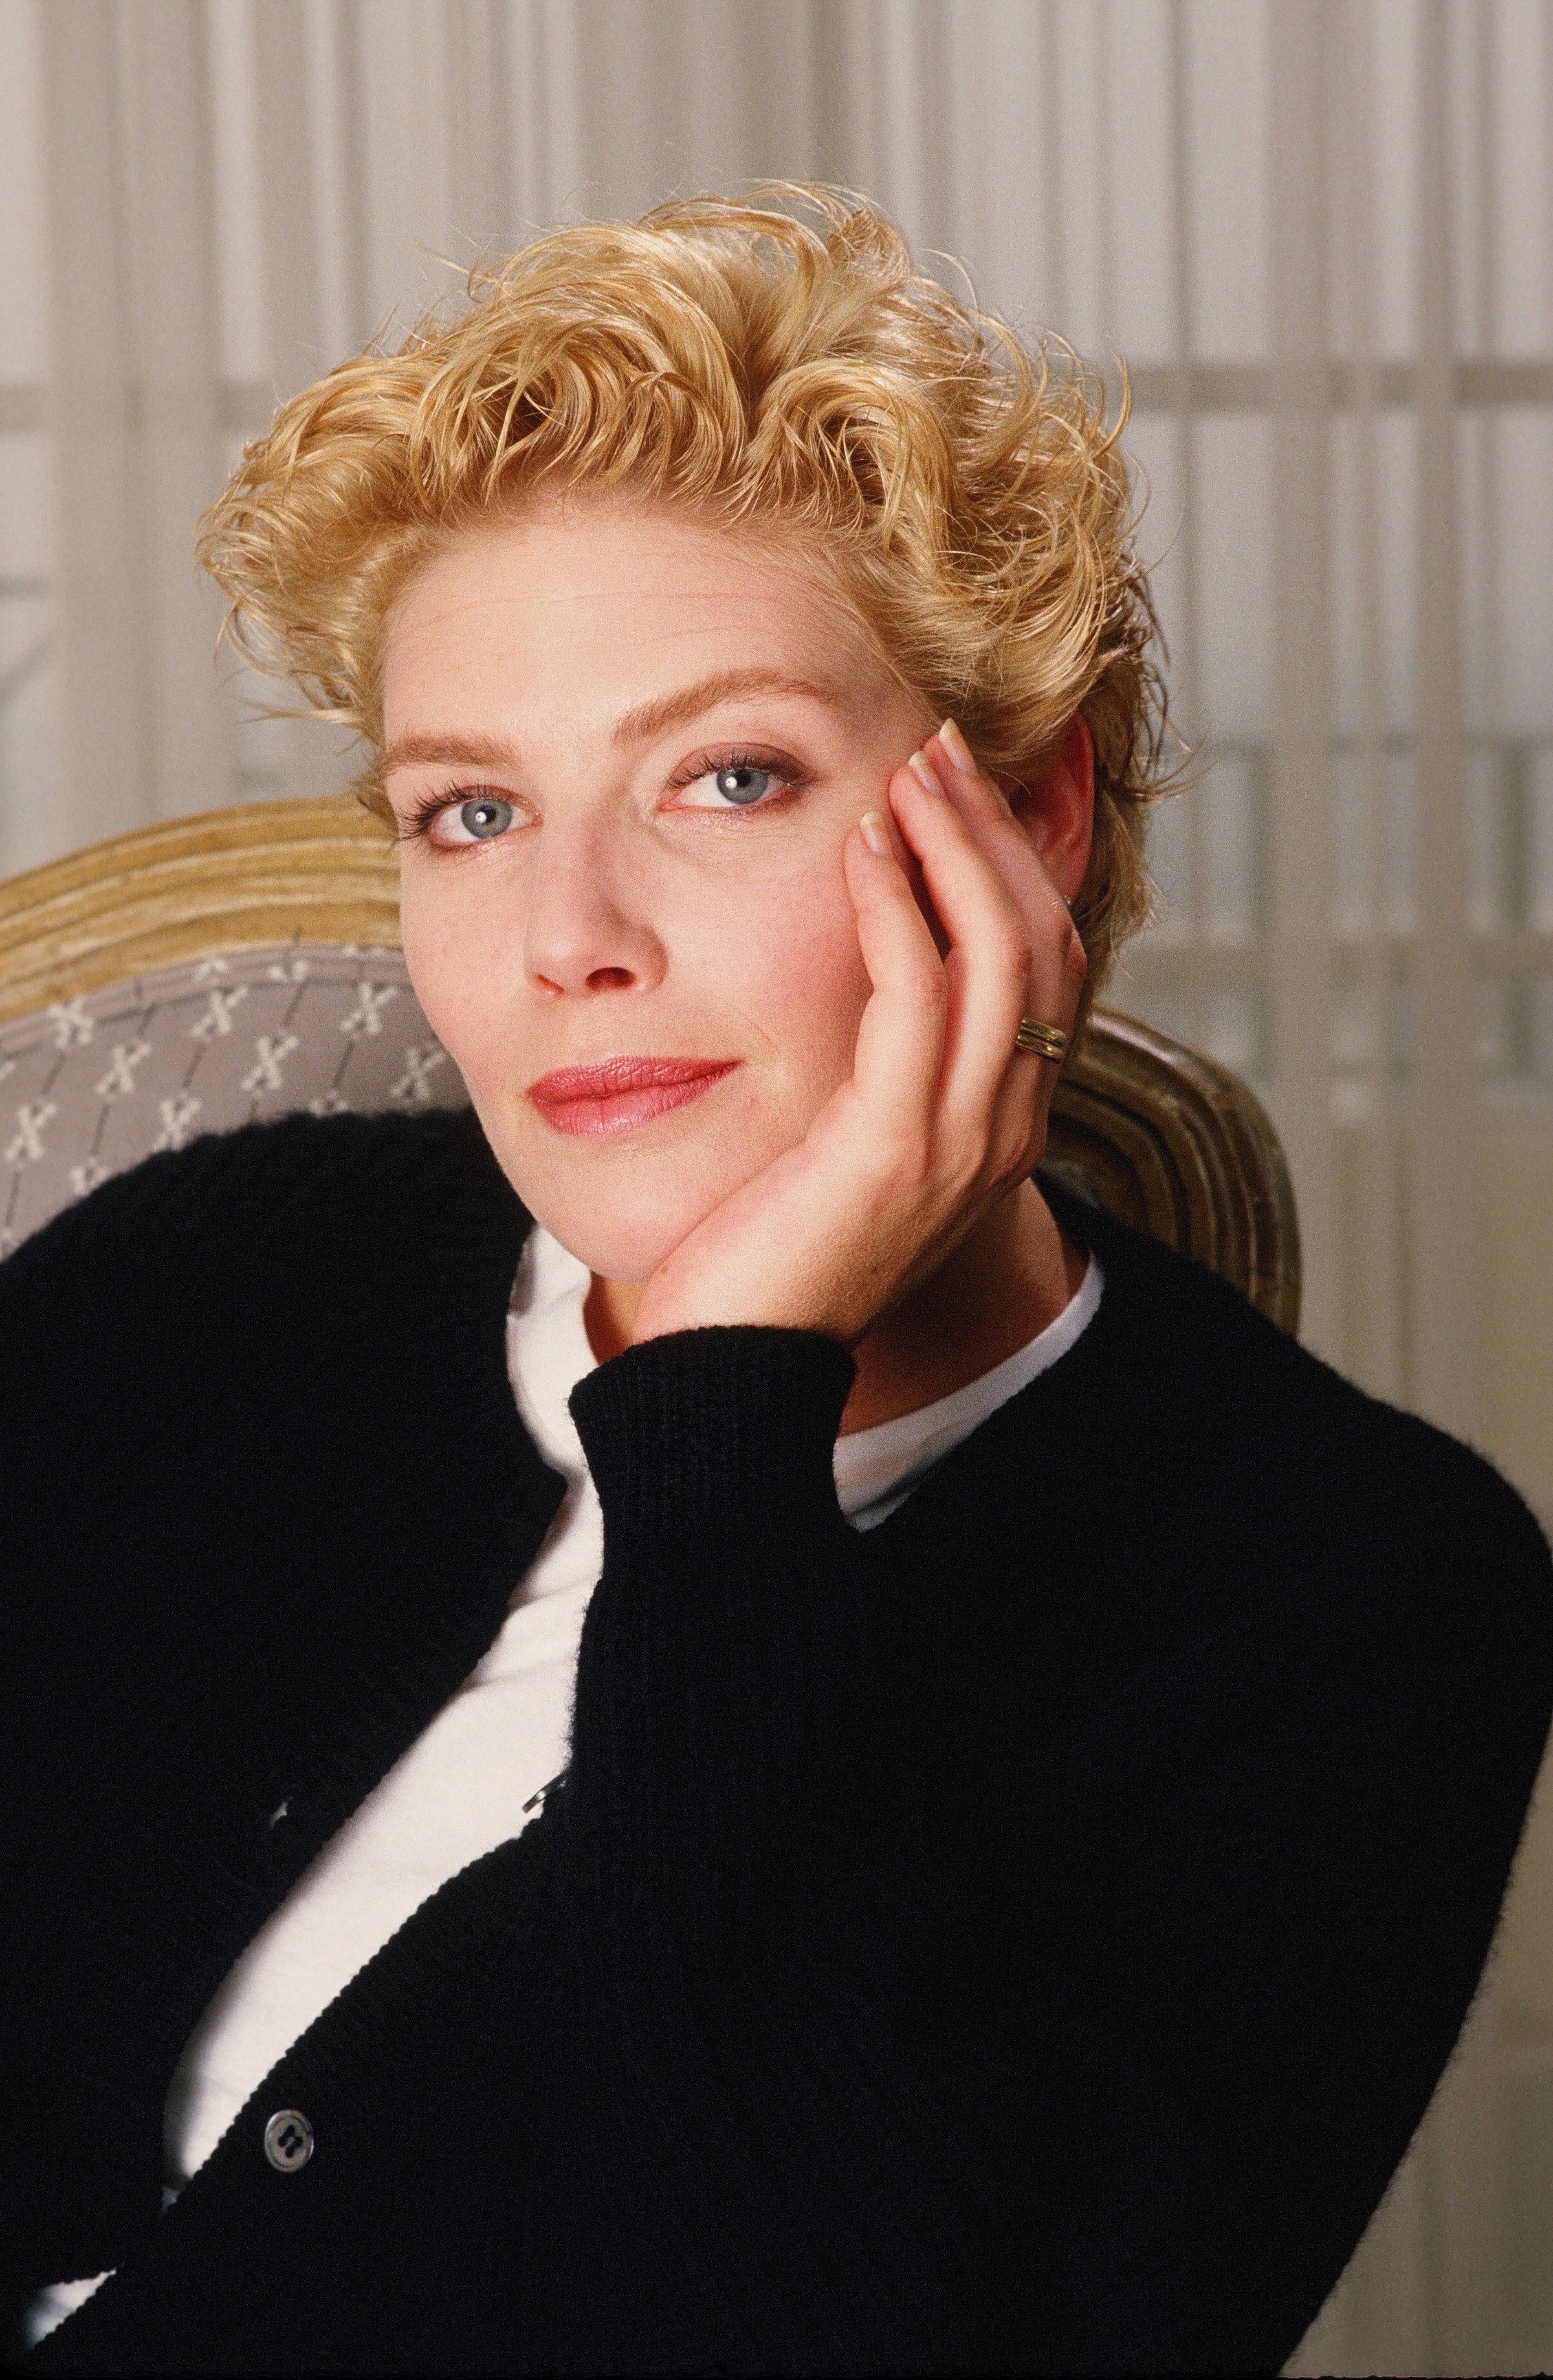 Kelly McGillis during a portrait photo session in 1988 in Beverly Hills, California | Photo: George Rose/Getty Images